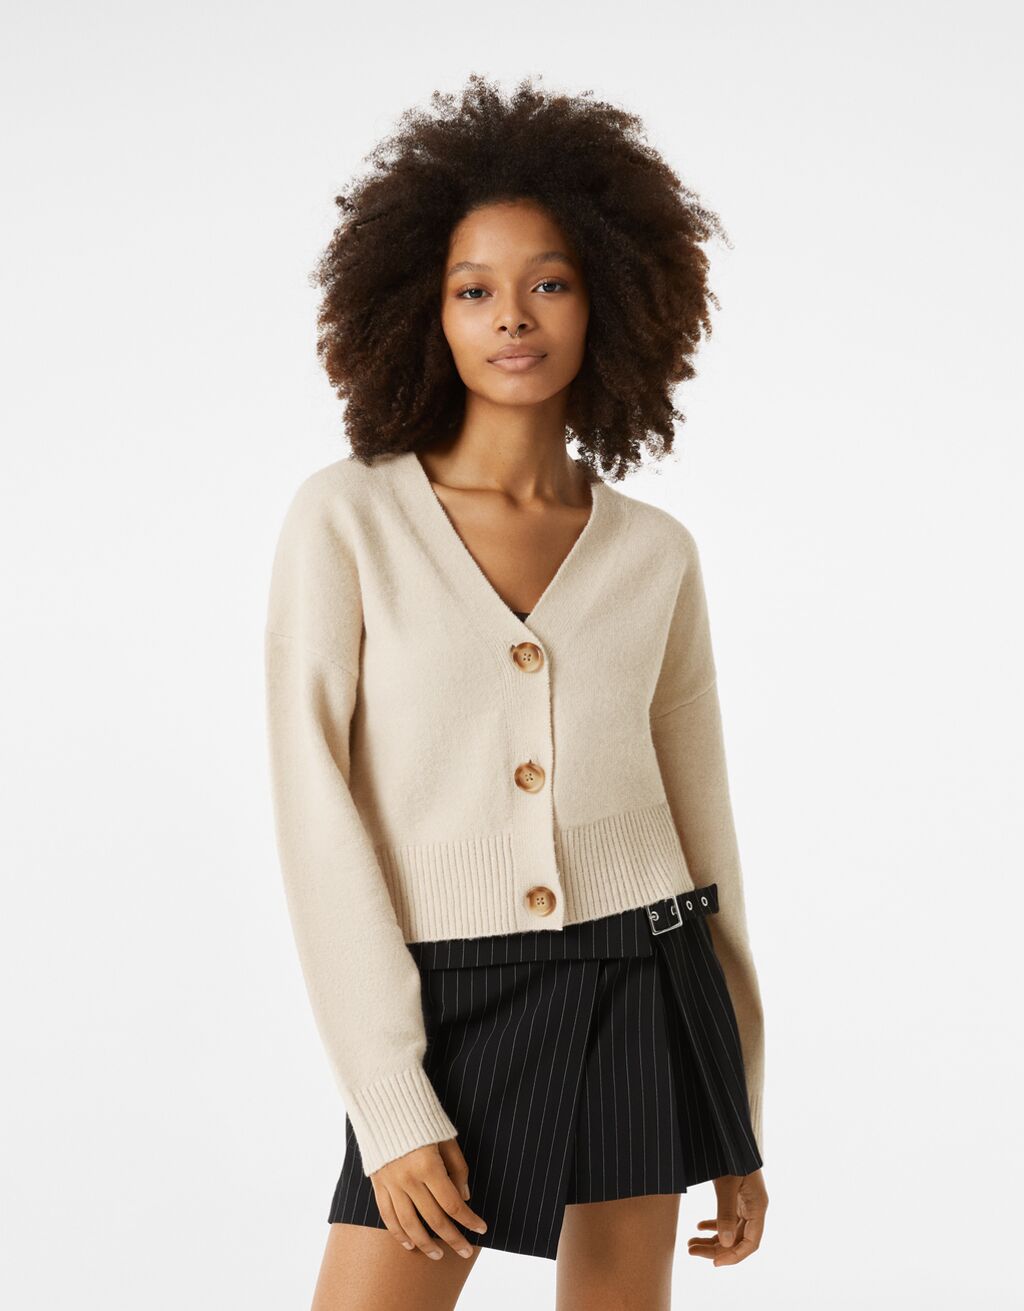 V-neck cardigan with buttons